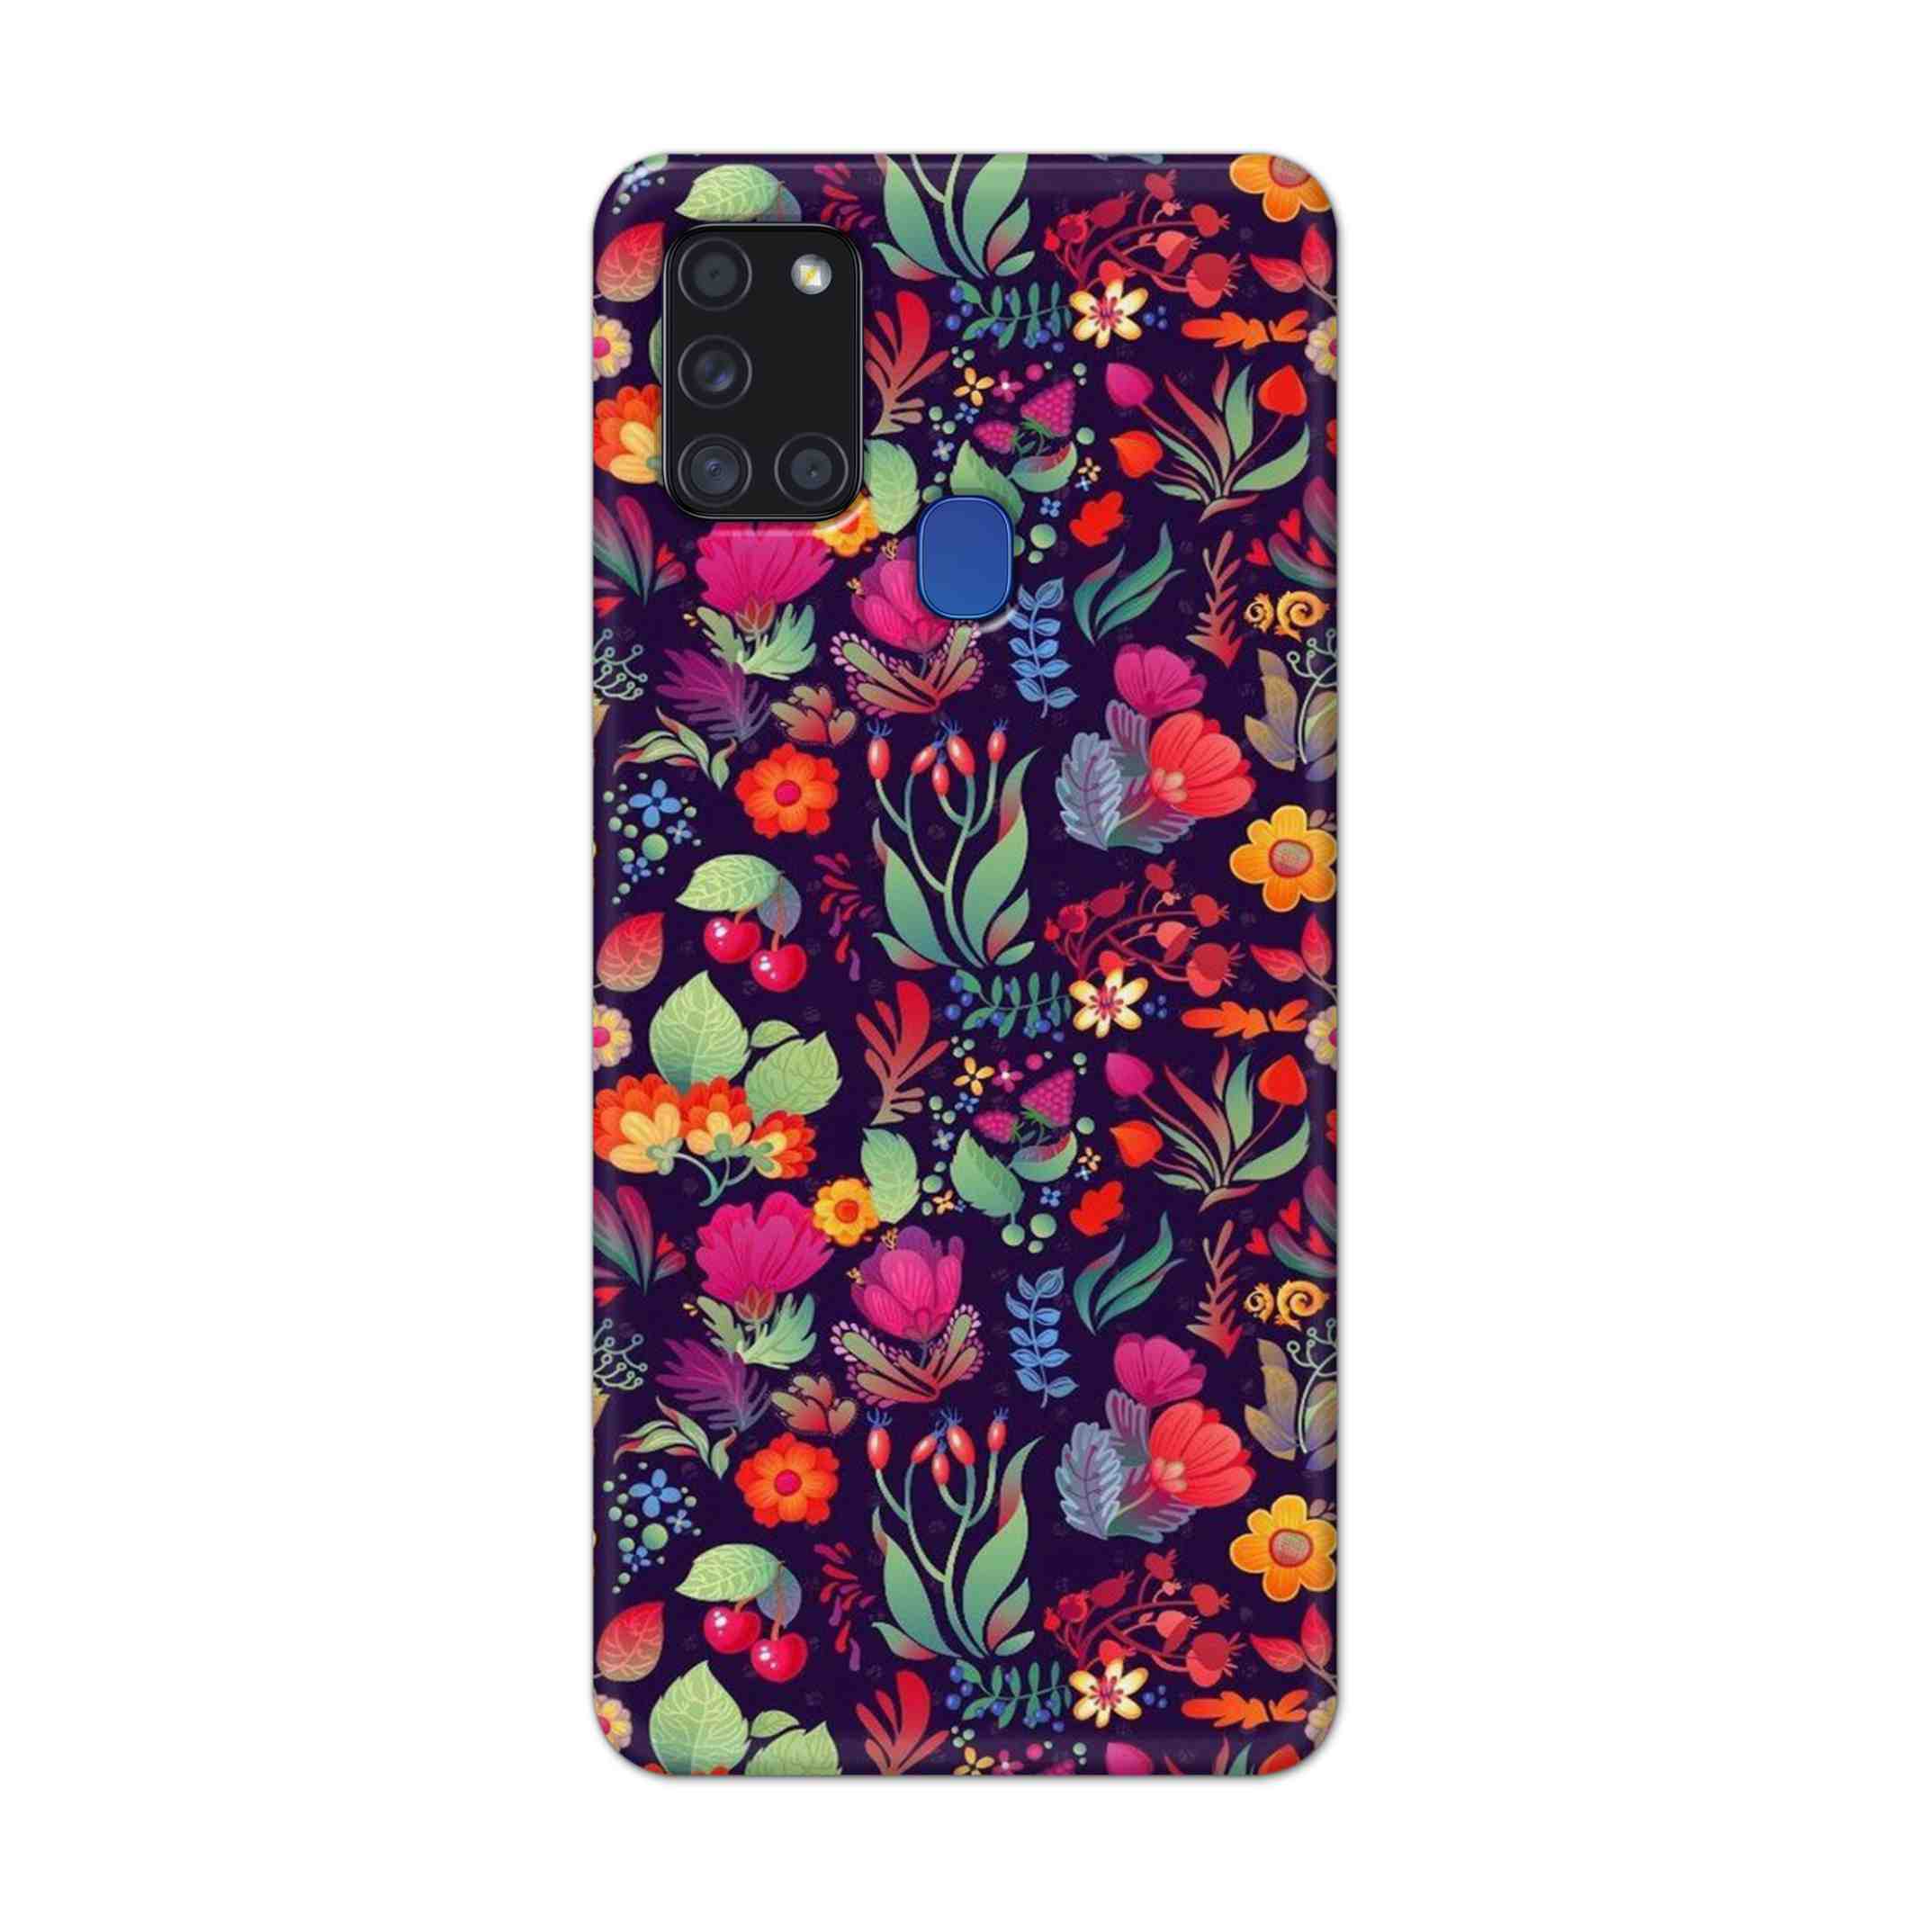 Buy Fruits Flower Hard Back Mobile Phone Case Cover For Samsung Galaxy A21s Online